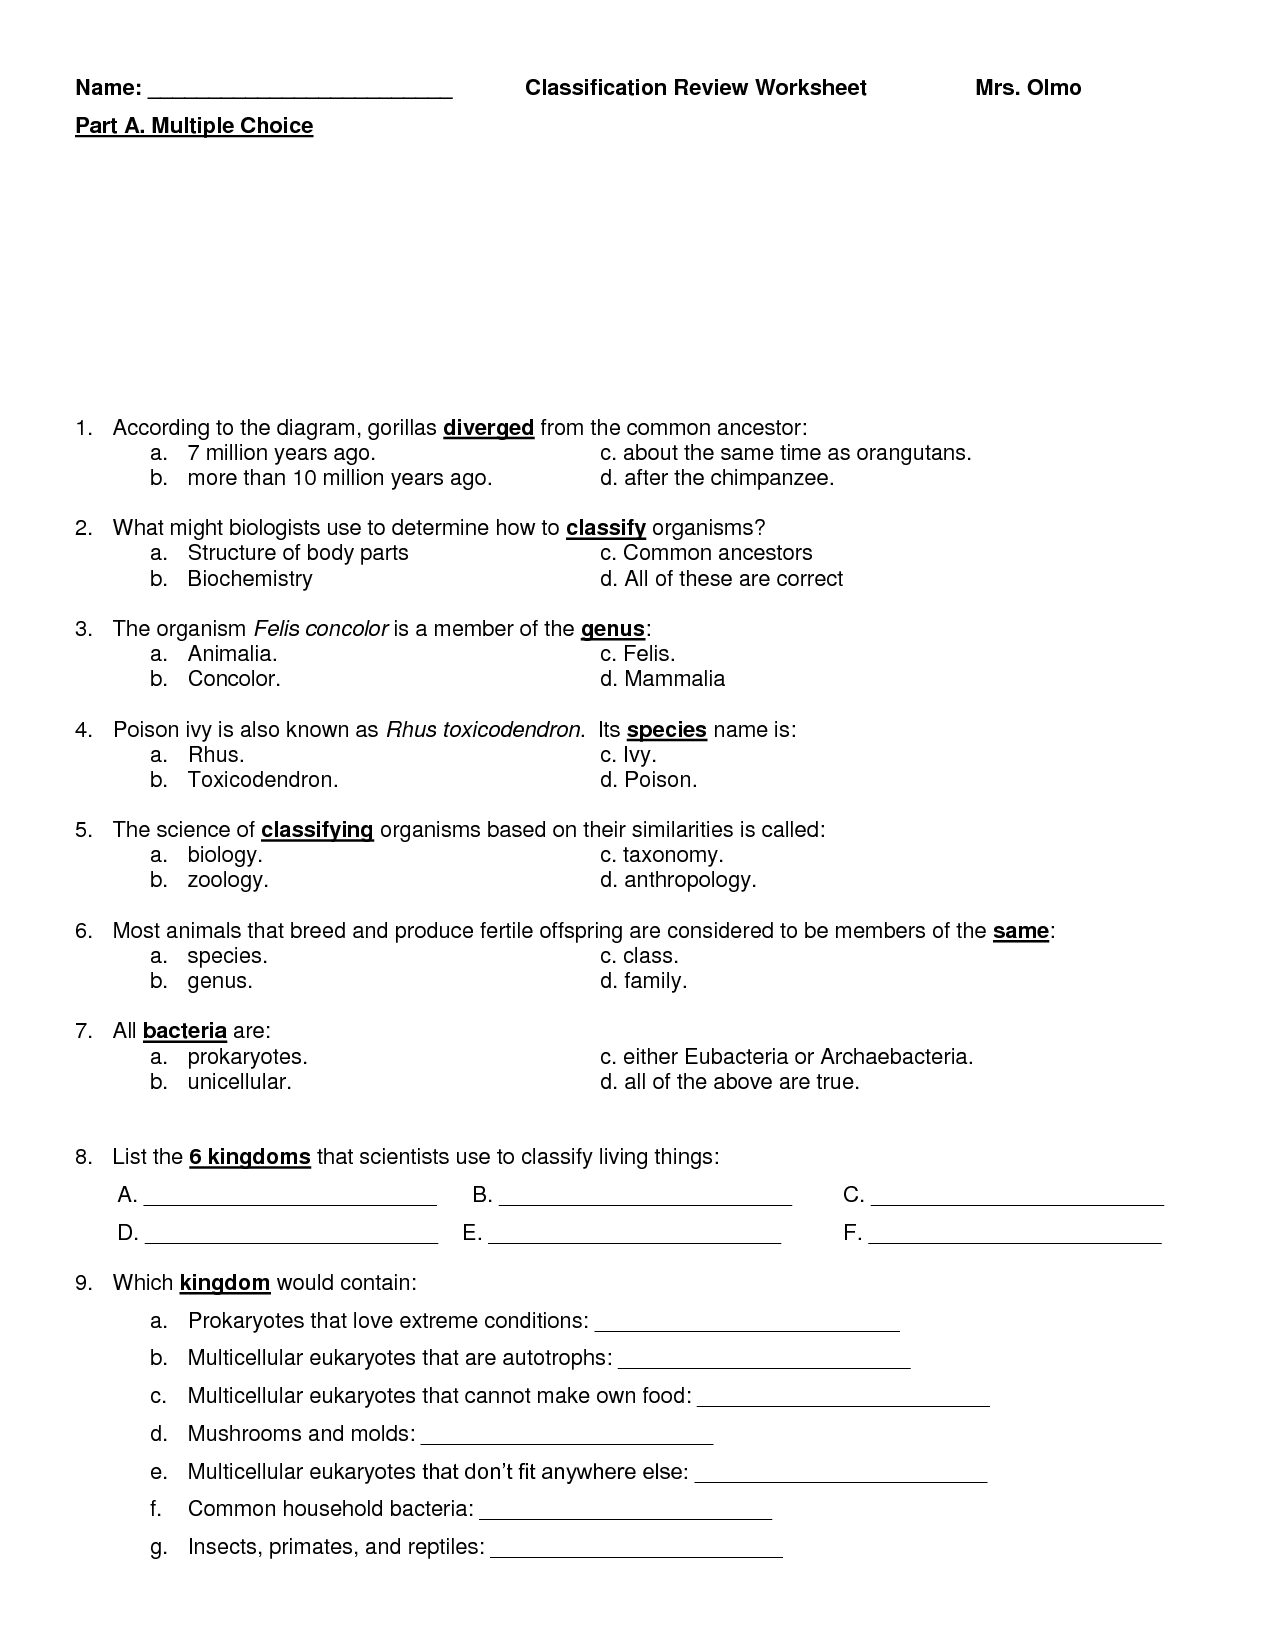 Classification of Living Things Worksheets Answer Image